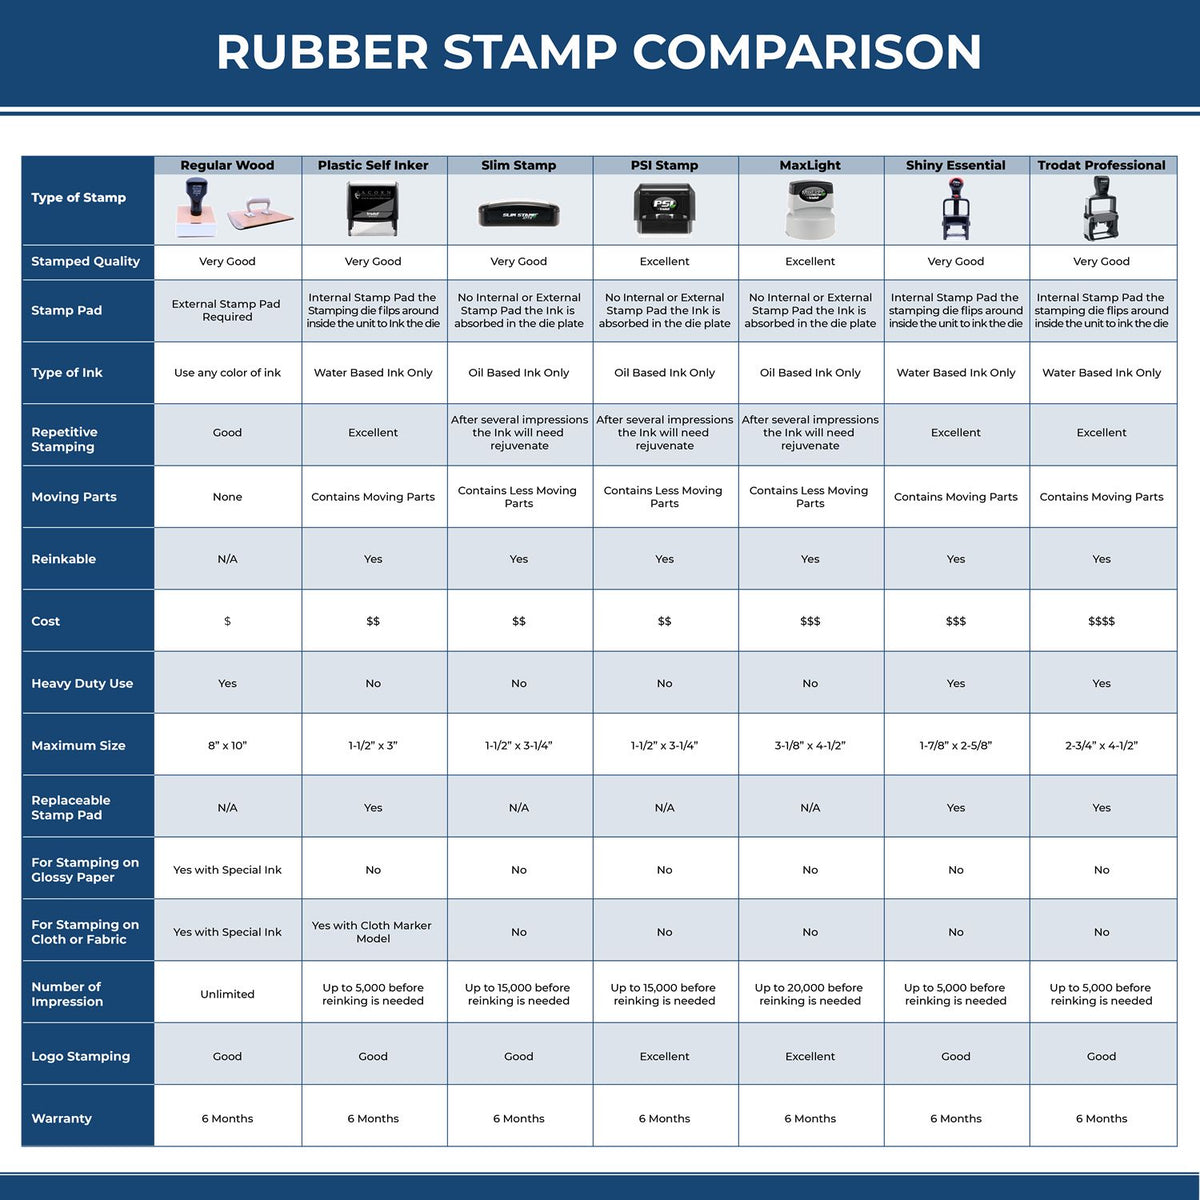 A comparison chart for the different types of mount models available for the MaxLight Premium Pre-Inked Wisconsin State Seal Notarial Stamp.